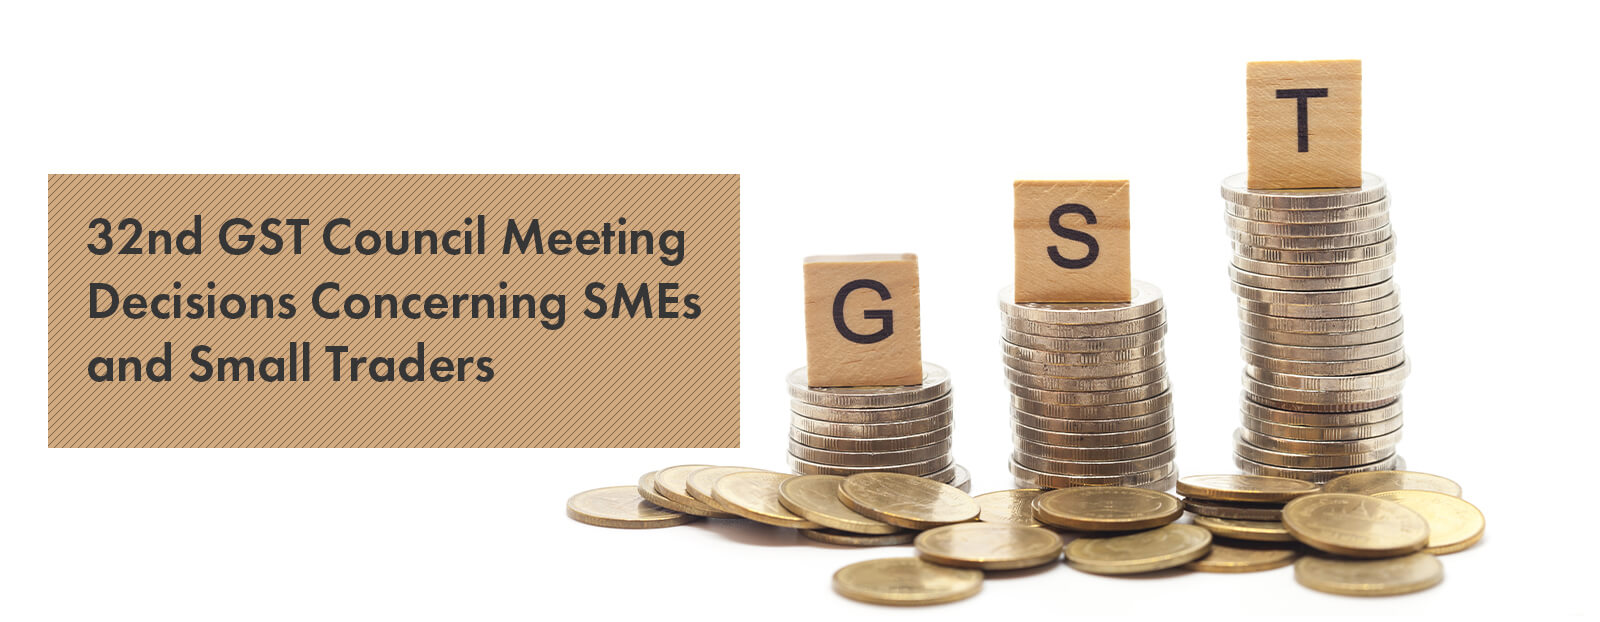 32nd GST Council Meeting Decisions Concerning SMEs and Small Traders